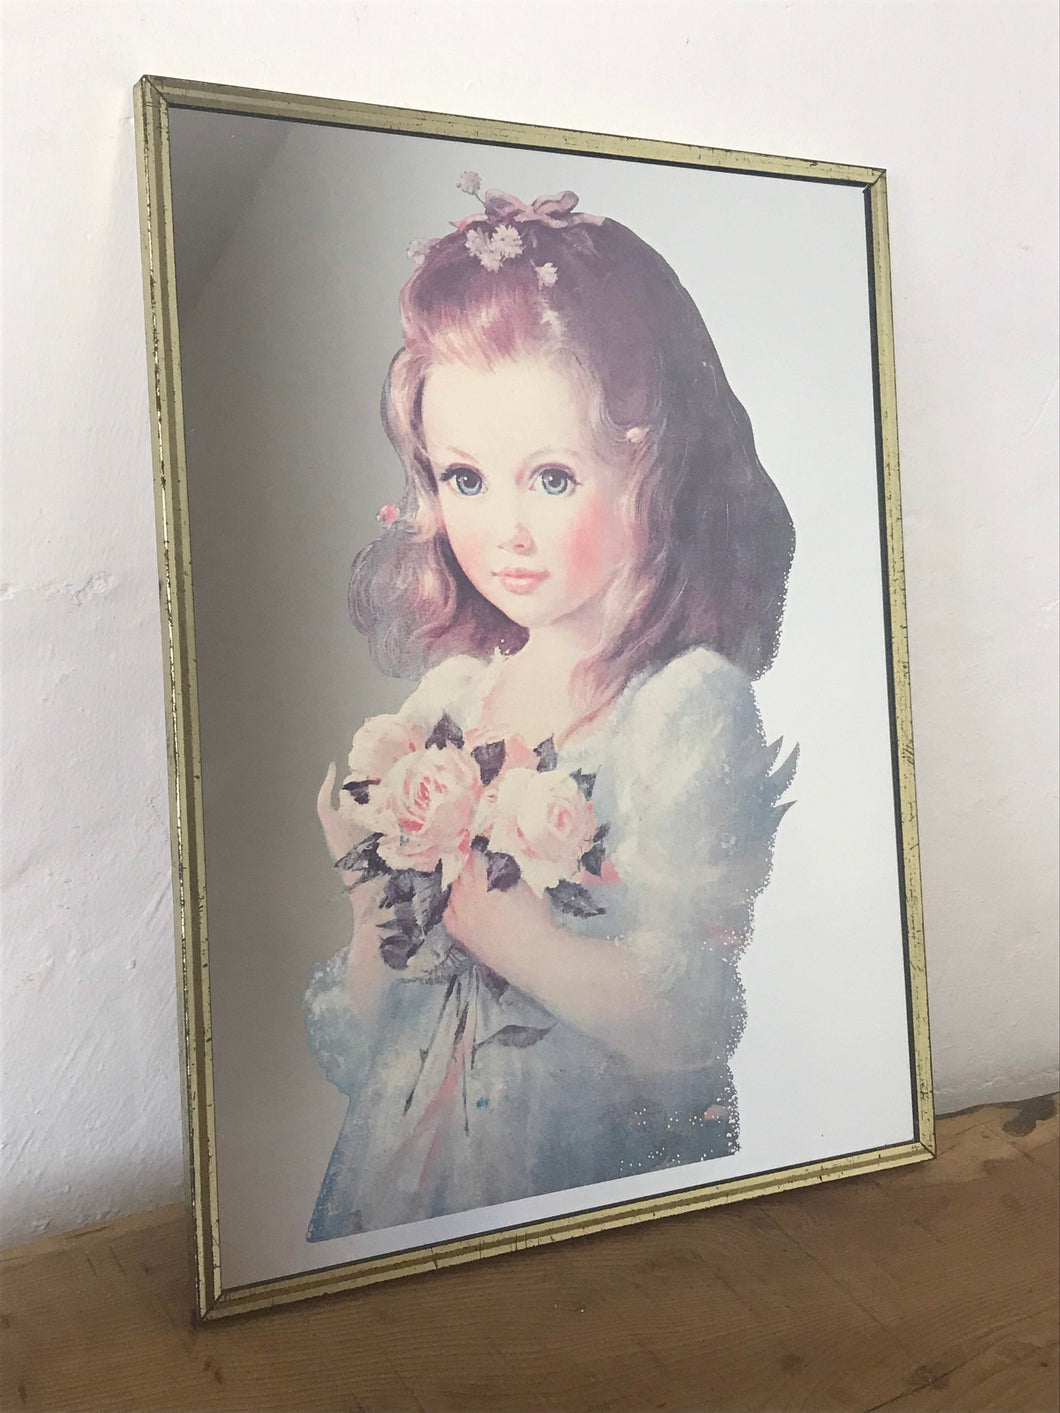 Vintage Victorian young girl, flowers pictures mirror, collectibles piece